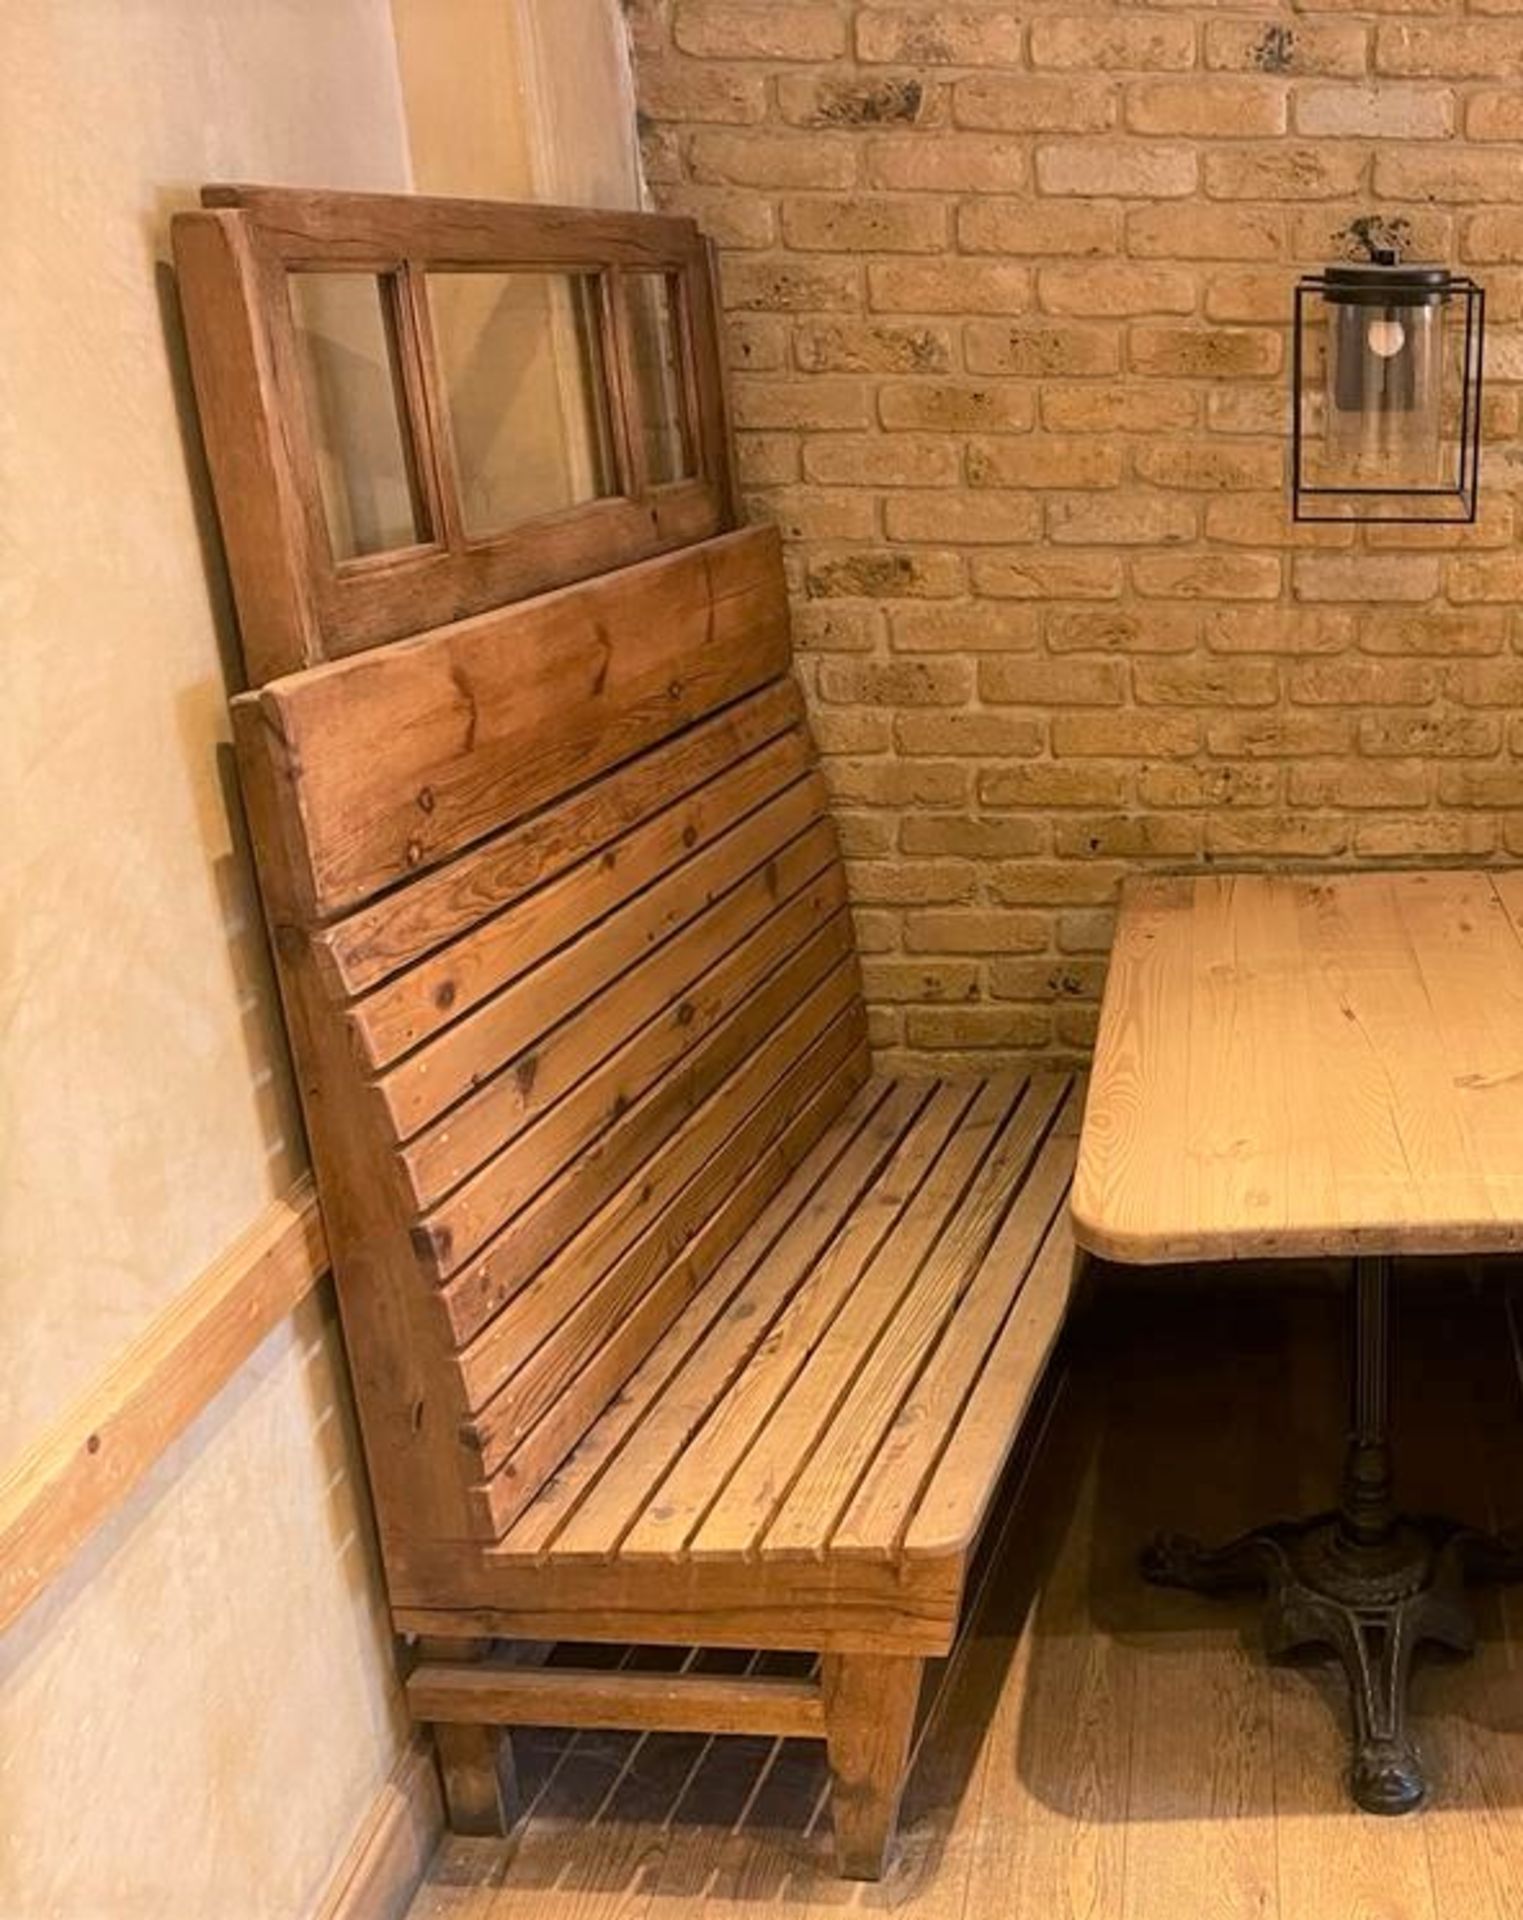 1 x Rustic Restaurant Seating Bench With Top Glass Partition - Image 3 of 8